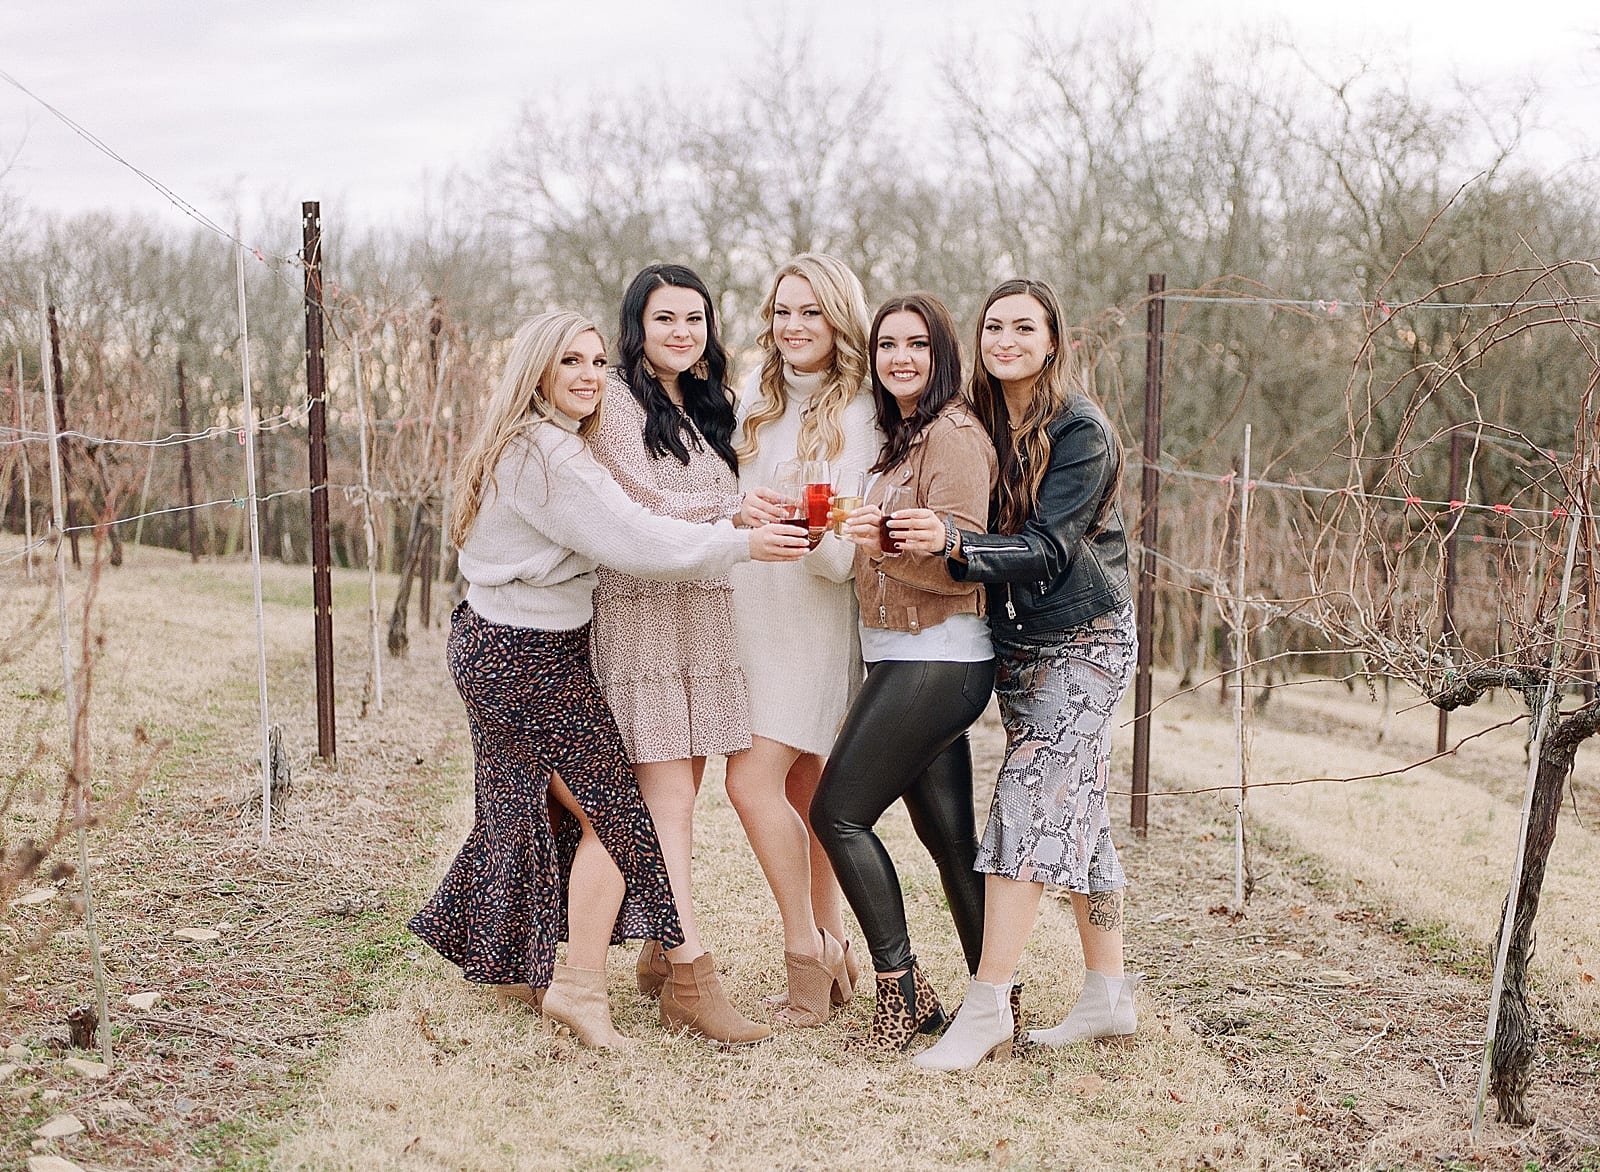 Bride to be with bridesmaids at winery photo